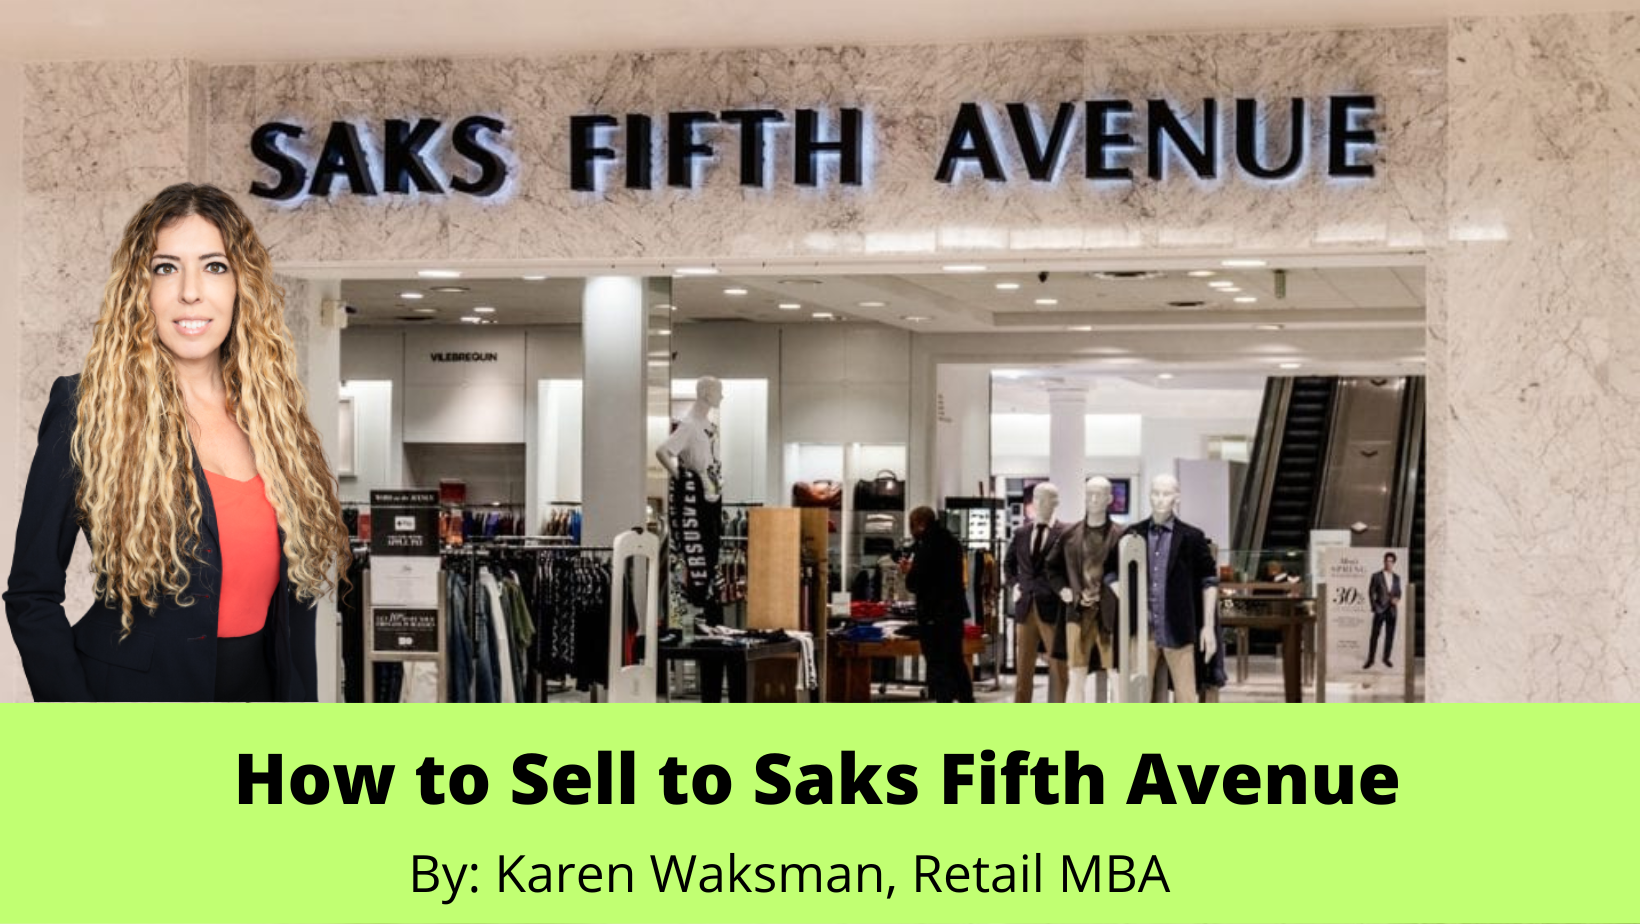 Sell to Saks Fifth Avenue and Become a Saks Fifth Avenue Vendor